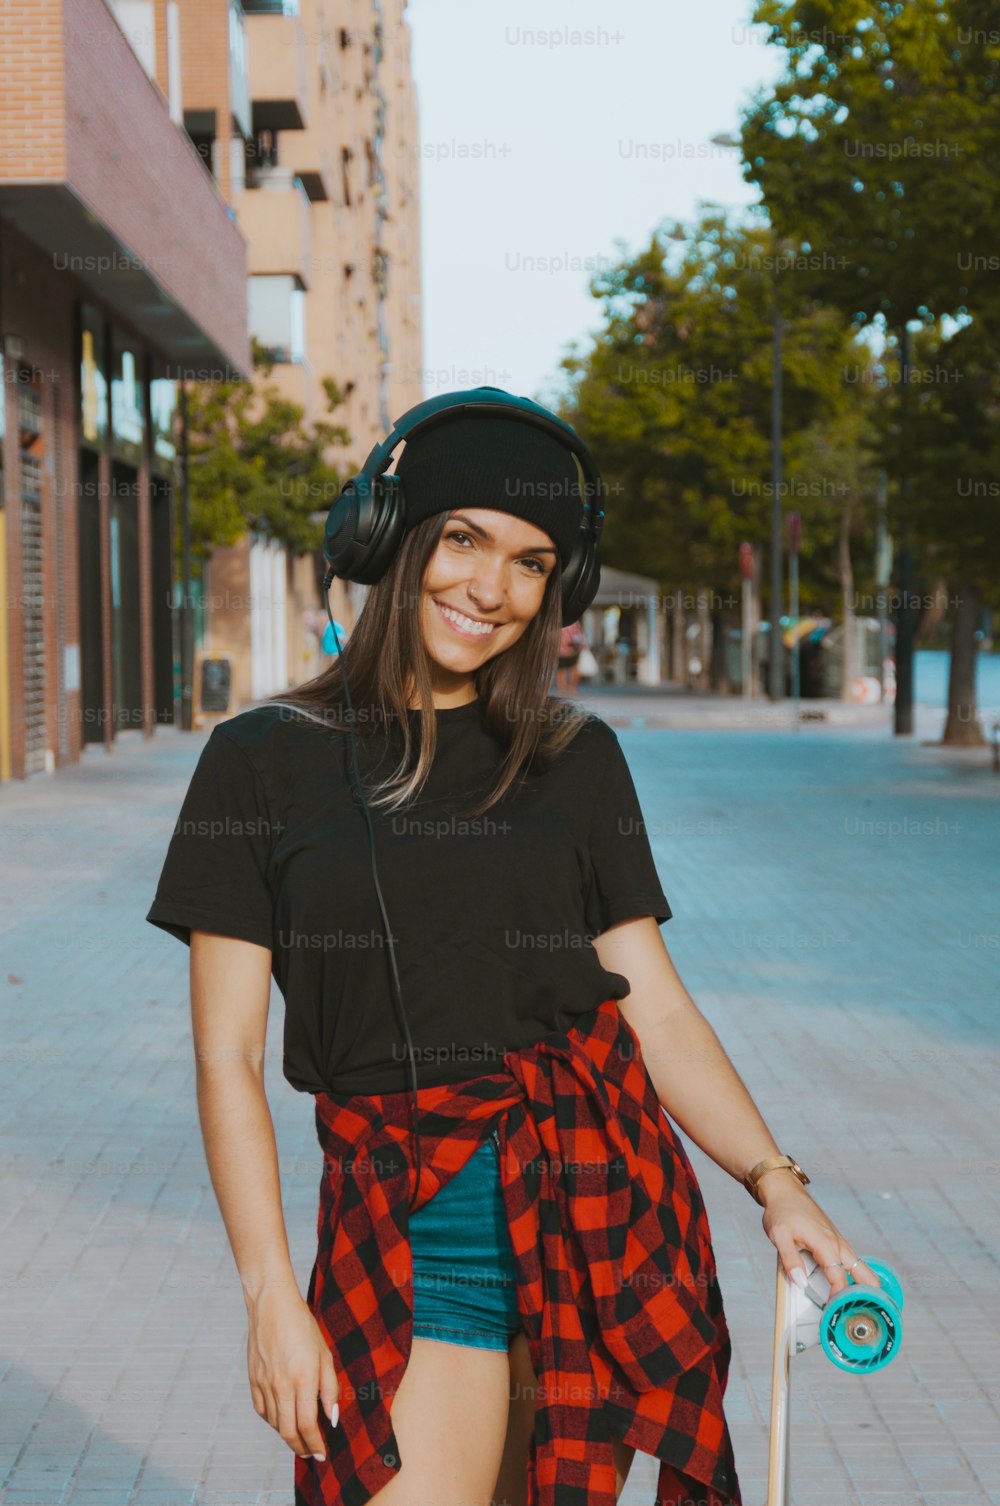 Portrait of a skate woman looking at you smiling. Girl in urban dress with headphones and skateboard.